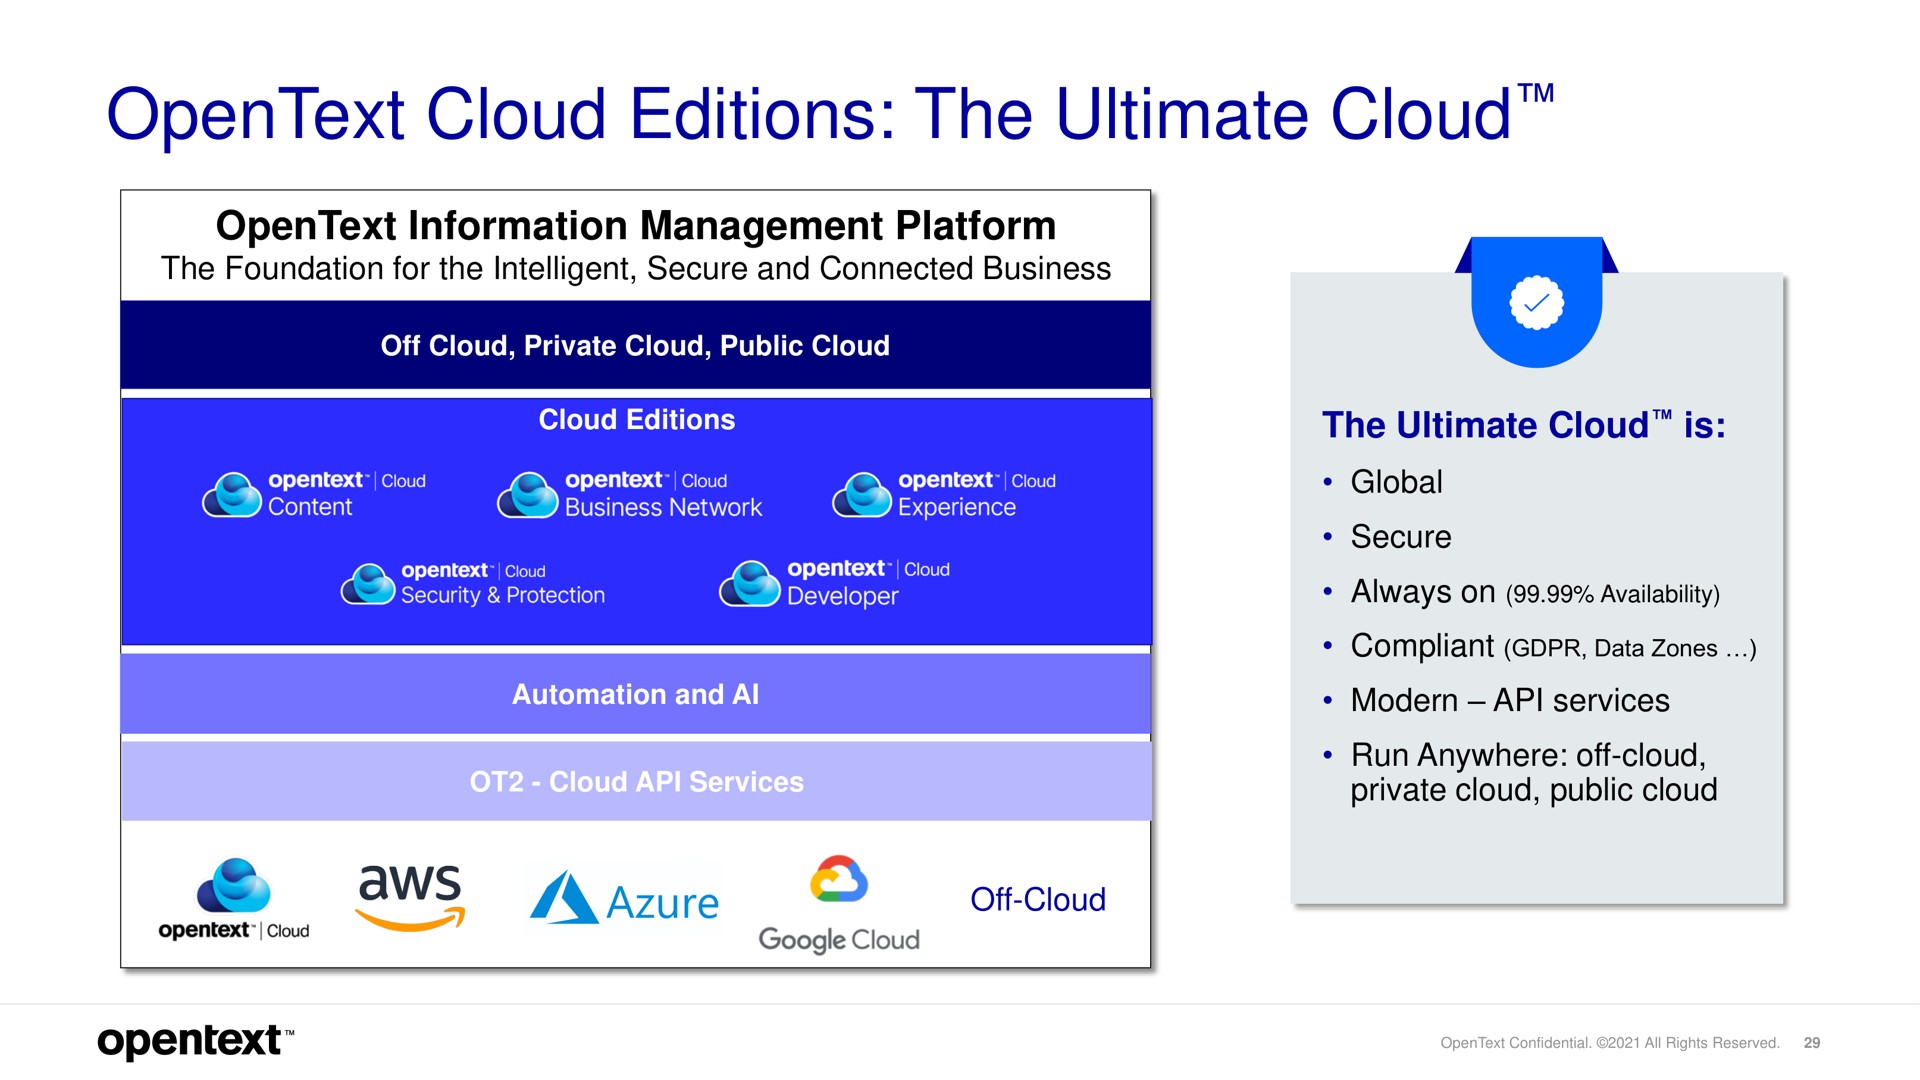 cloud editions the ultimate cloud | OpenText